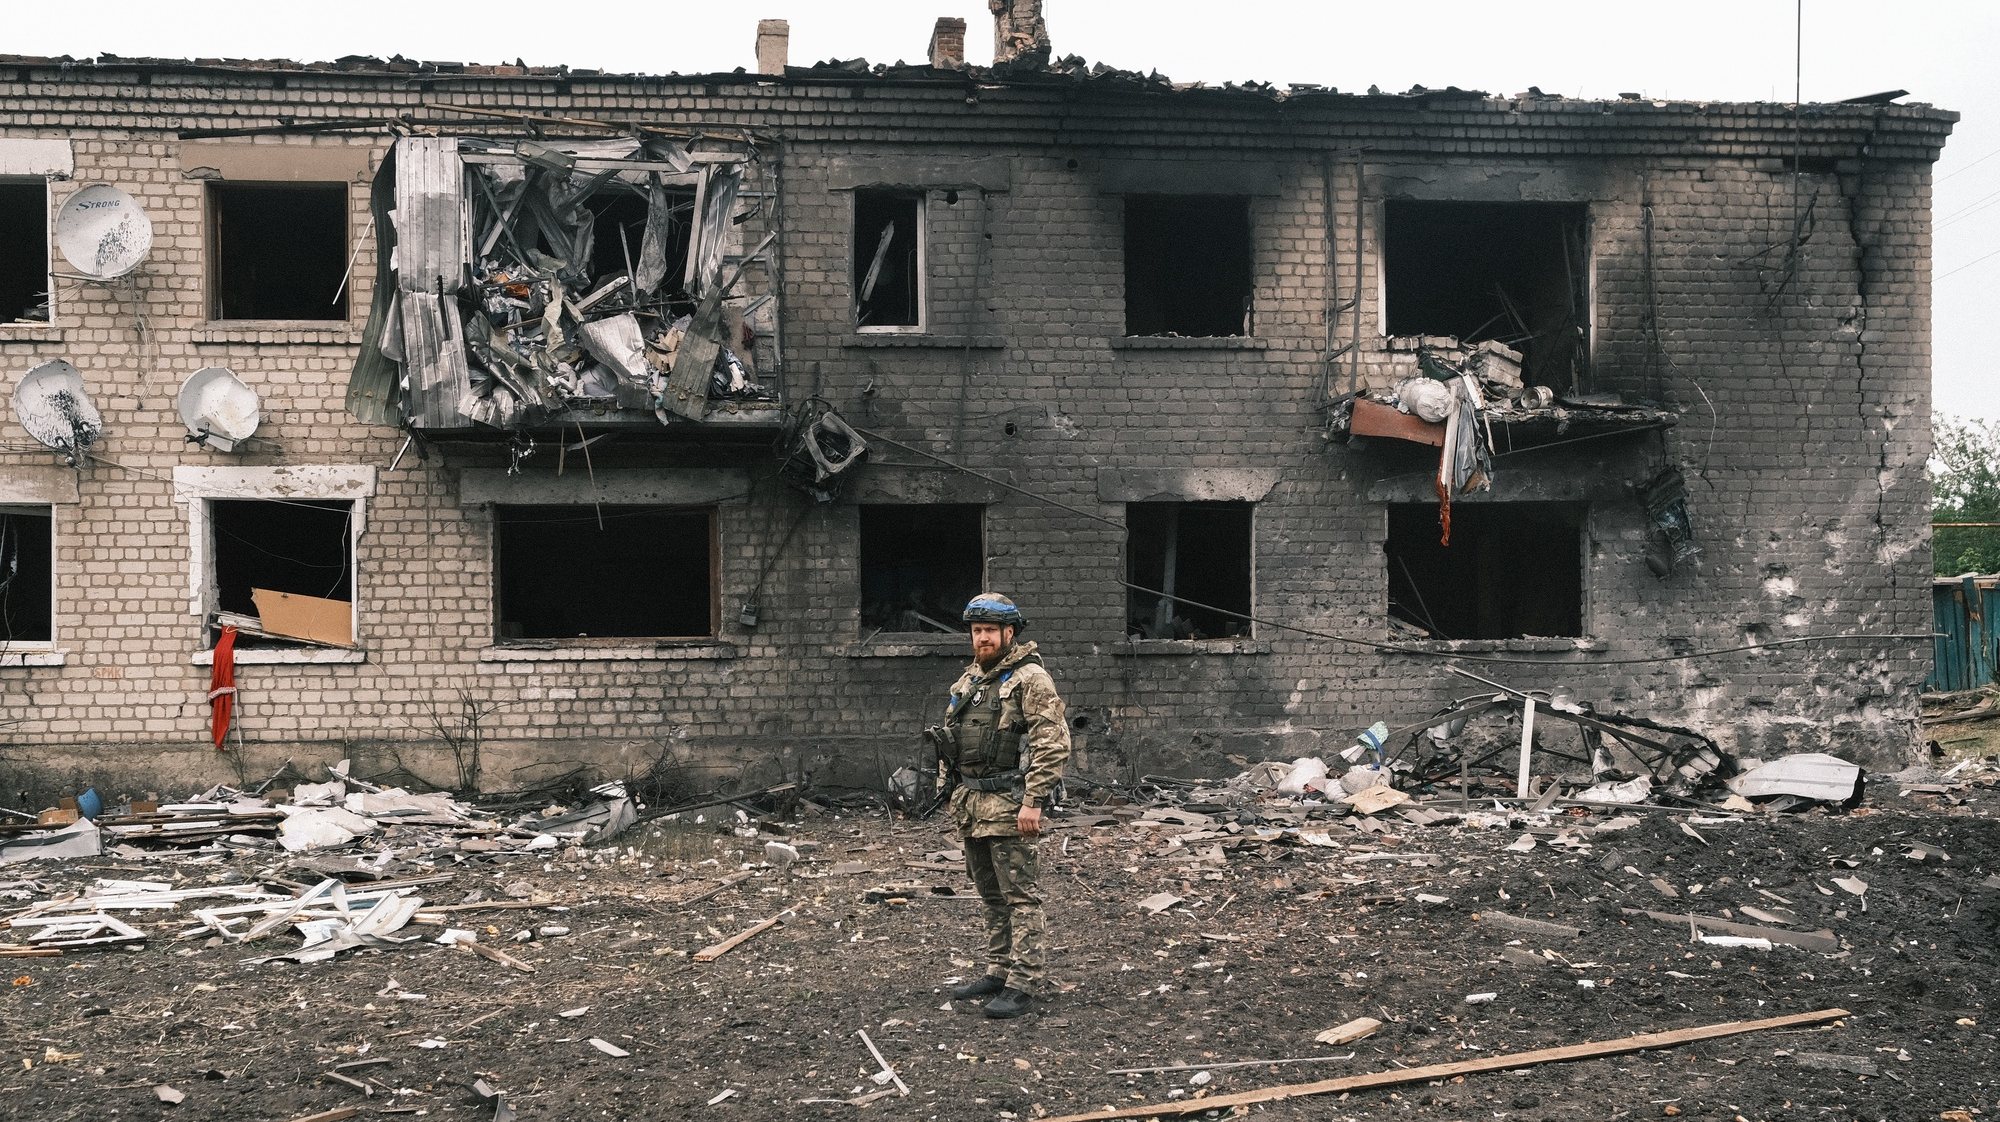 epa11336743 A Ukrainian police officer inspects a damaged building during the evacuation of local people from territories bordering Russia, in the city of Vovchansk, Kharkiv region, northeastern Ukraine, 13 May 2024, amid the Russian invasion. More than 4,000 residents from settlements in areas of the Kharkiv region bordering Russia have been evacuated as &#039;hostilities intensified&#039;, the head of the Kharkiv Military Administration Oleg Synegubov wrote on telegram. The evacuations follow a cross-border offensive by Russian forces, who claimed the capture of several villages in the region. Russian troops entered Ukrainian territory on 24 February 2022, starting a conflict that has provoked destruction and a humanitarian crisis.  EPA/GEORGE IVANCHENKO